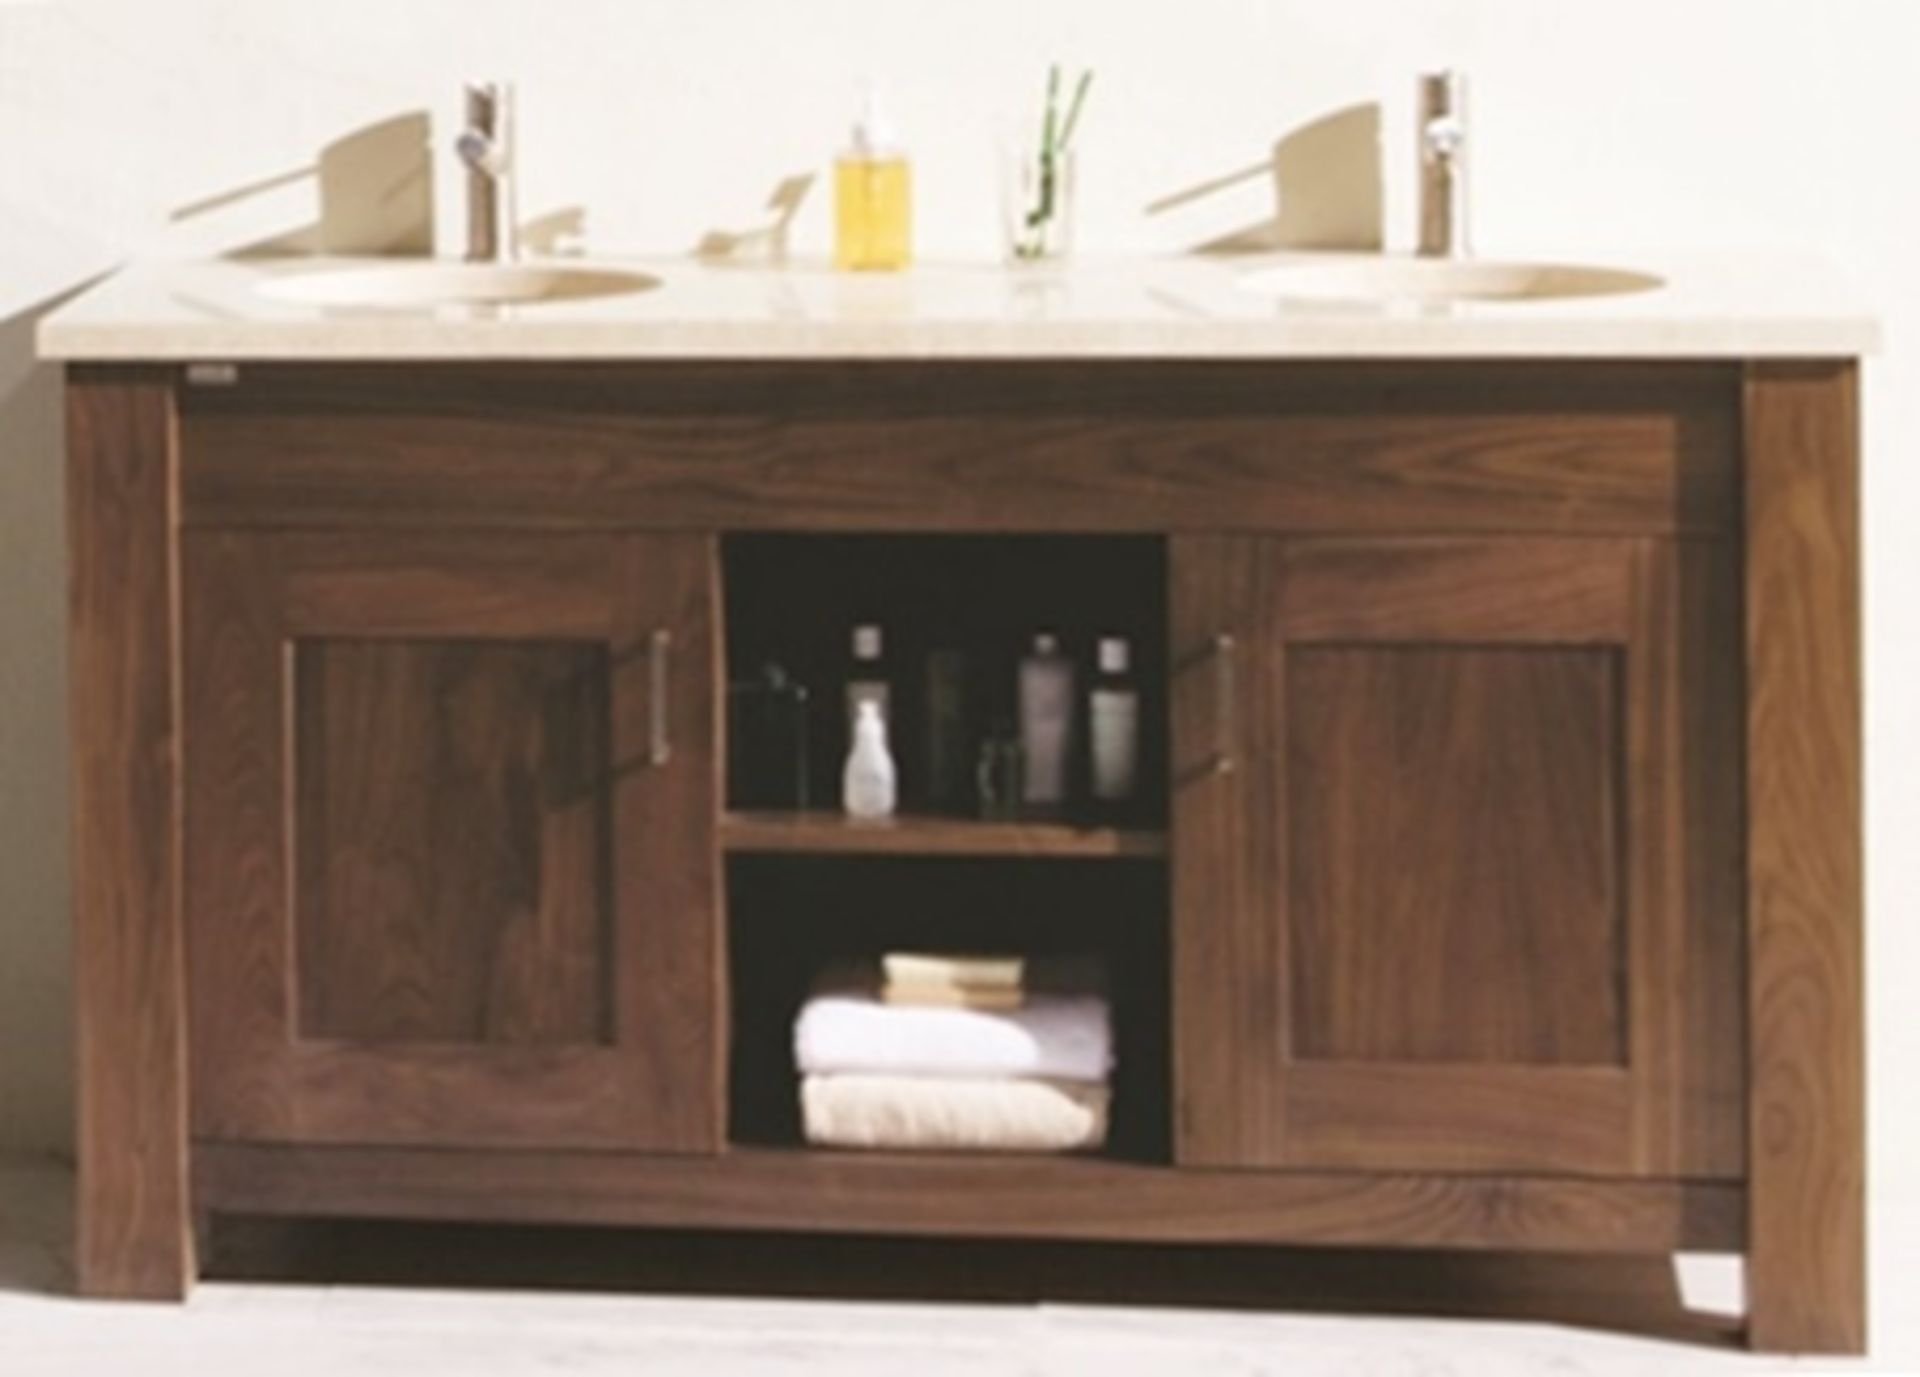 1 x Stonearth 'Finesse' Countertop 1500mm Tall Washstand - American Solid Walnut - RRP £1,900